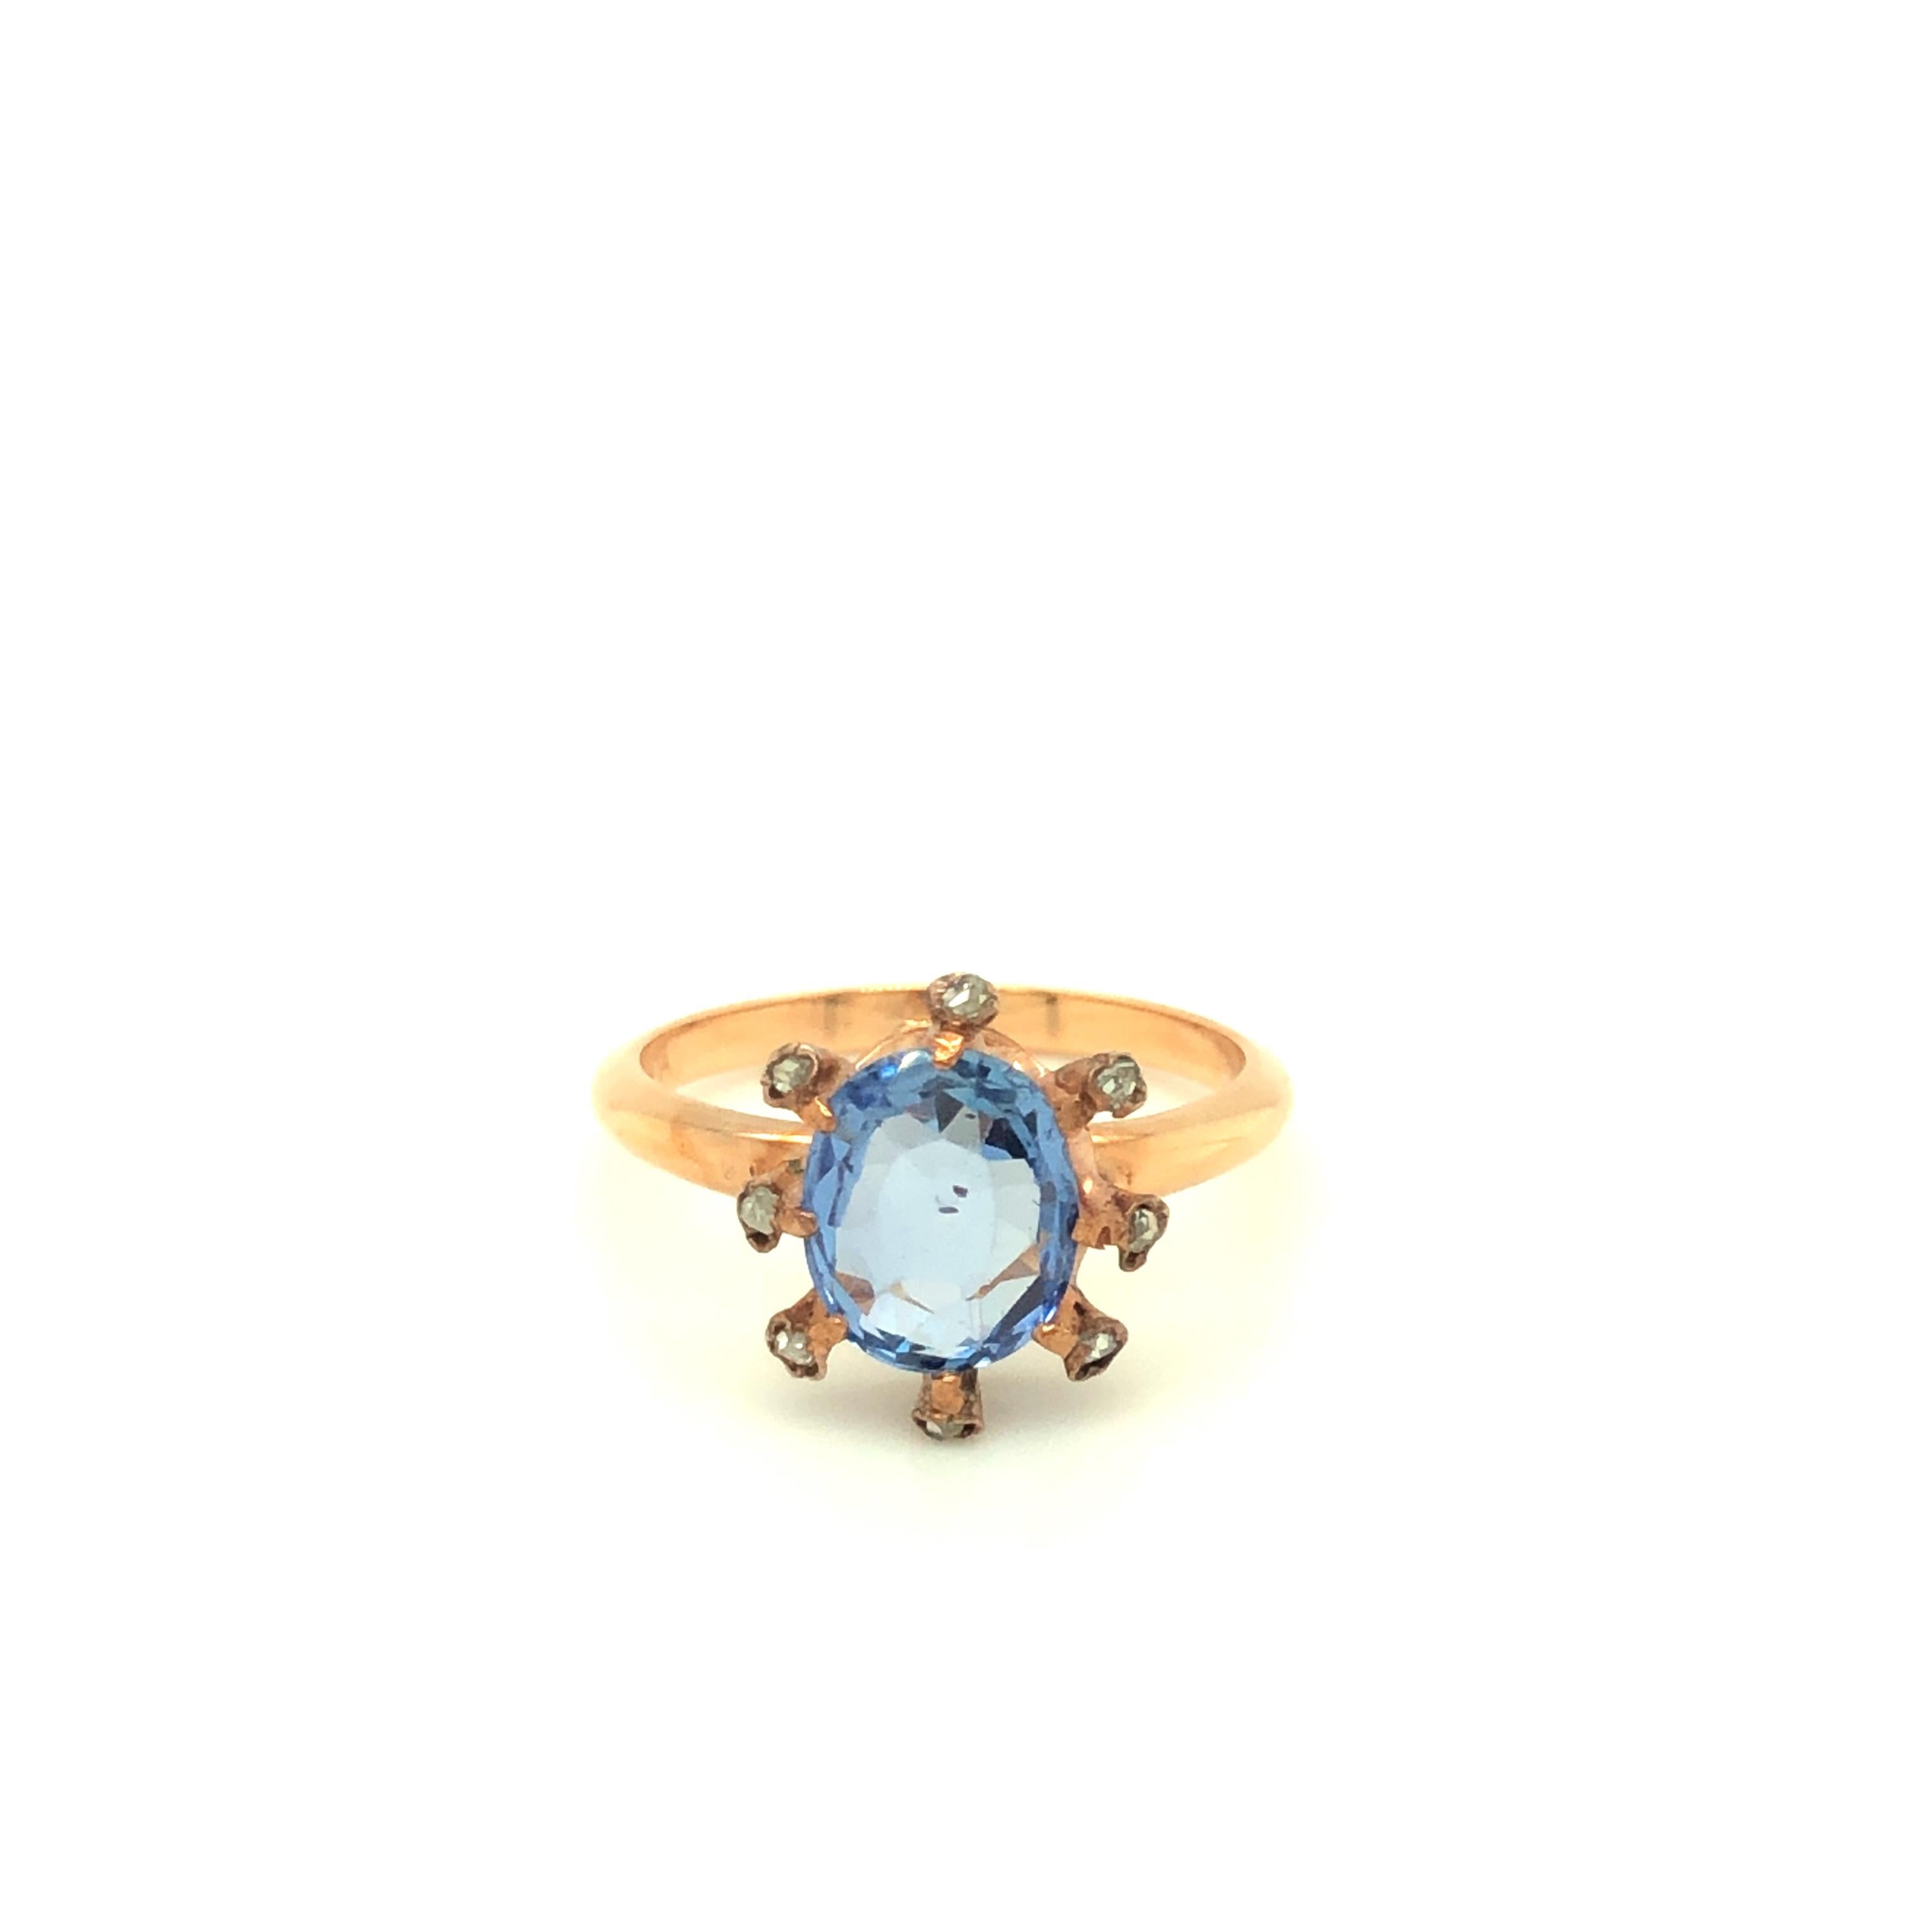 Here we have a gorgeous Edwardian Era unheated sapphire in 14k gold ring. The ring top is an original with a new ring band. It is absolutely beautiful and is accompanied by a GIA certificate. It has been well preserved throughout so many years. The